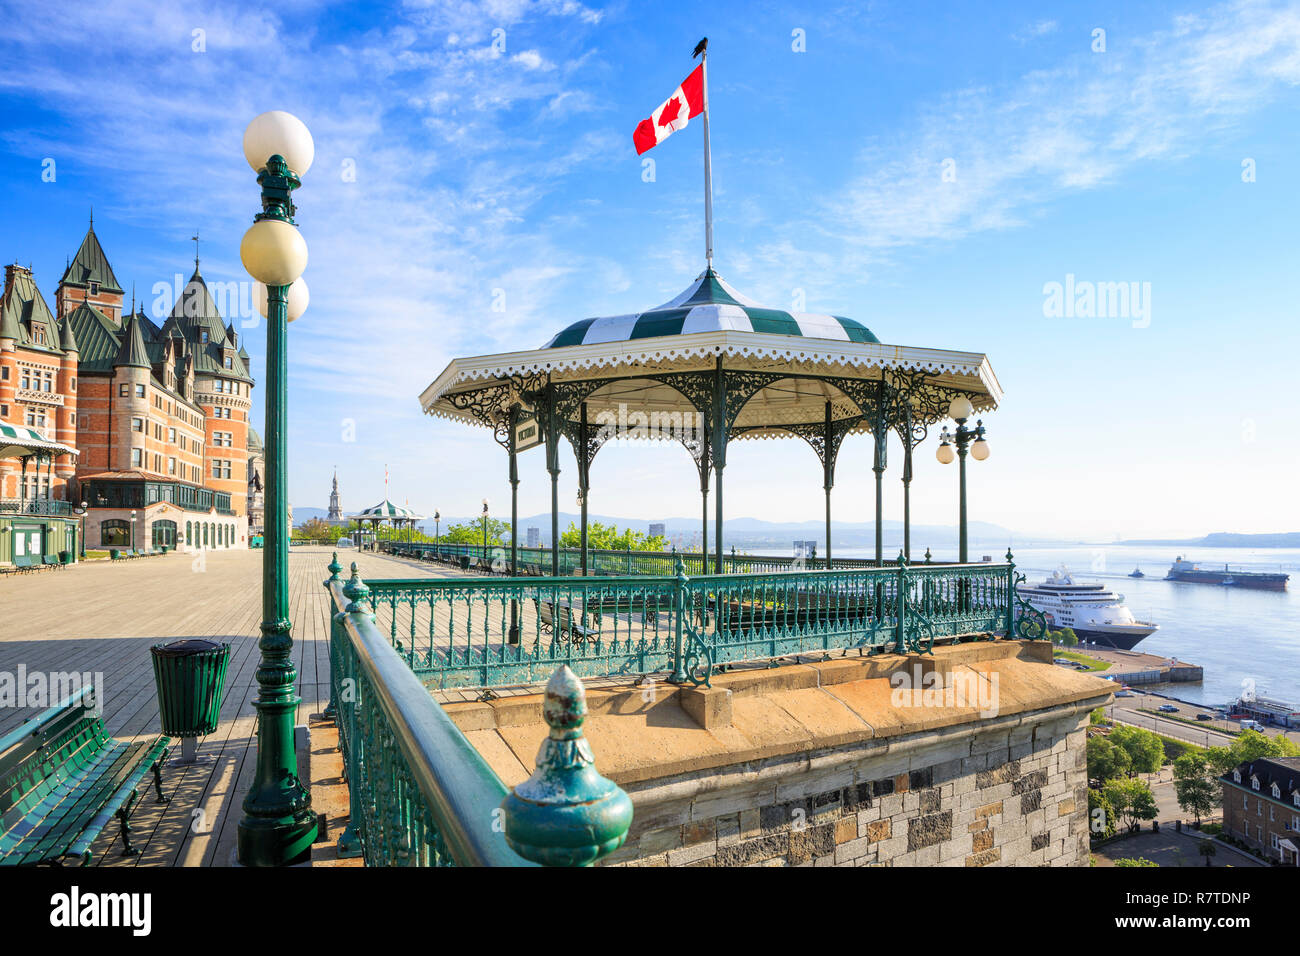 Quebec City, Canada. Early morning shot of Terrasse Dufferin with the Hotel Chateau Frontenac in the background to the left. No people present. Stock Photo